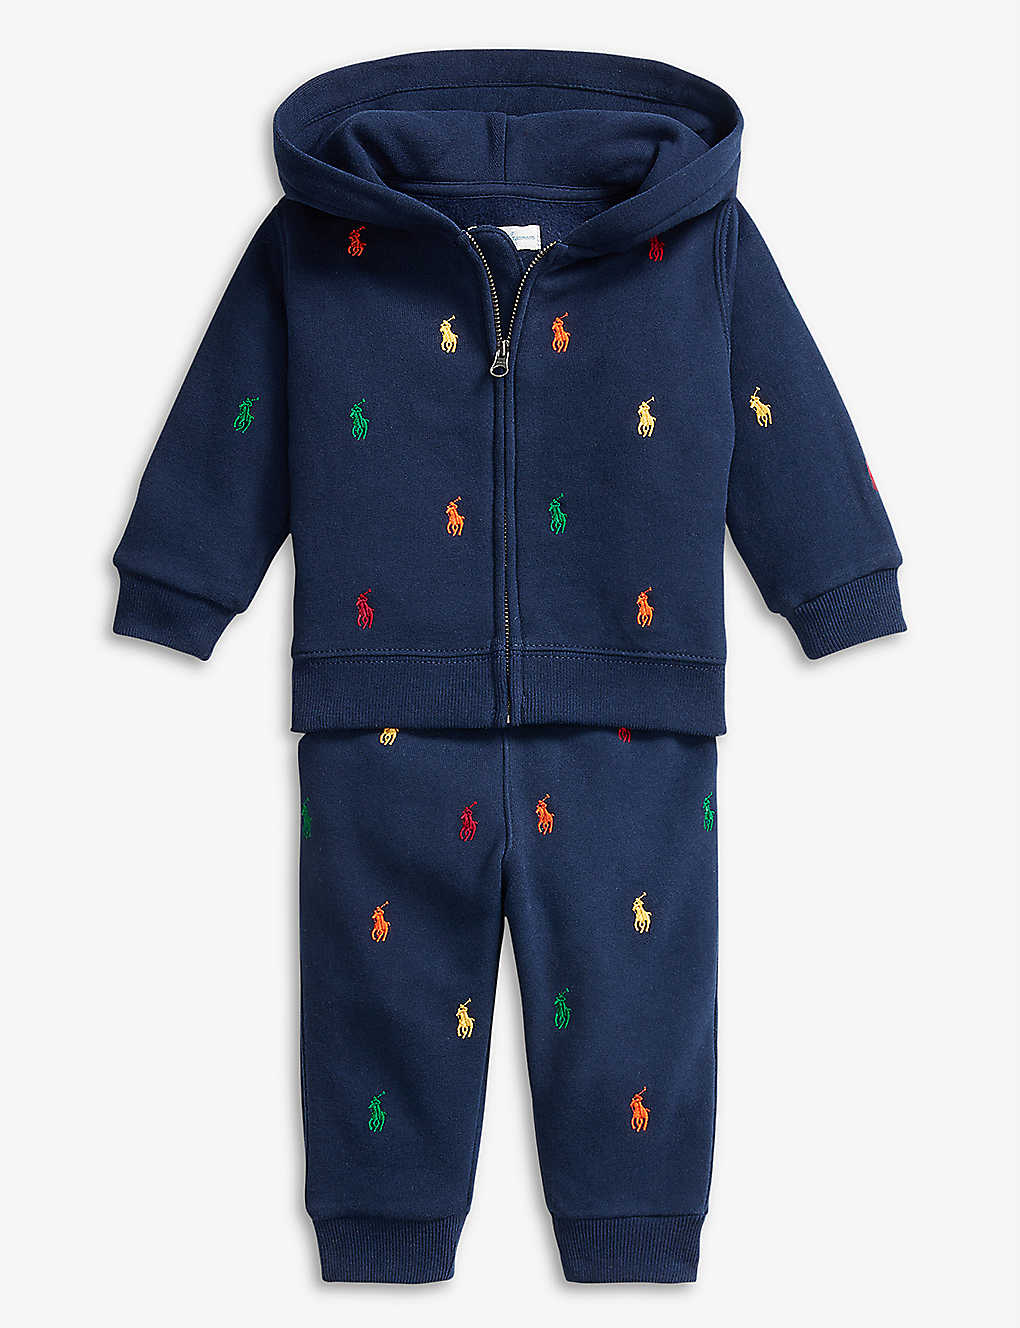 Polo Pony logo-embroidered cotton-blend hoody and trouser set 3-24 months Selfridges & Co Clothing Outfit Sets Sets 